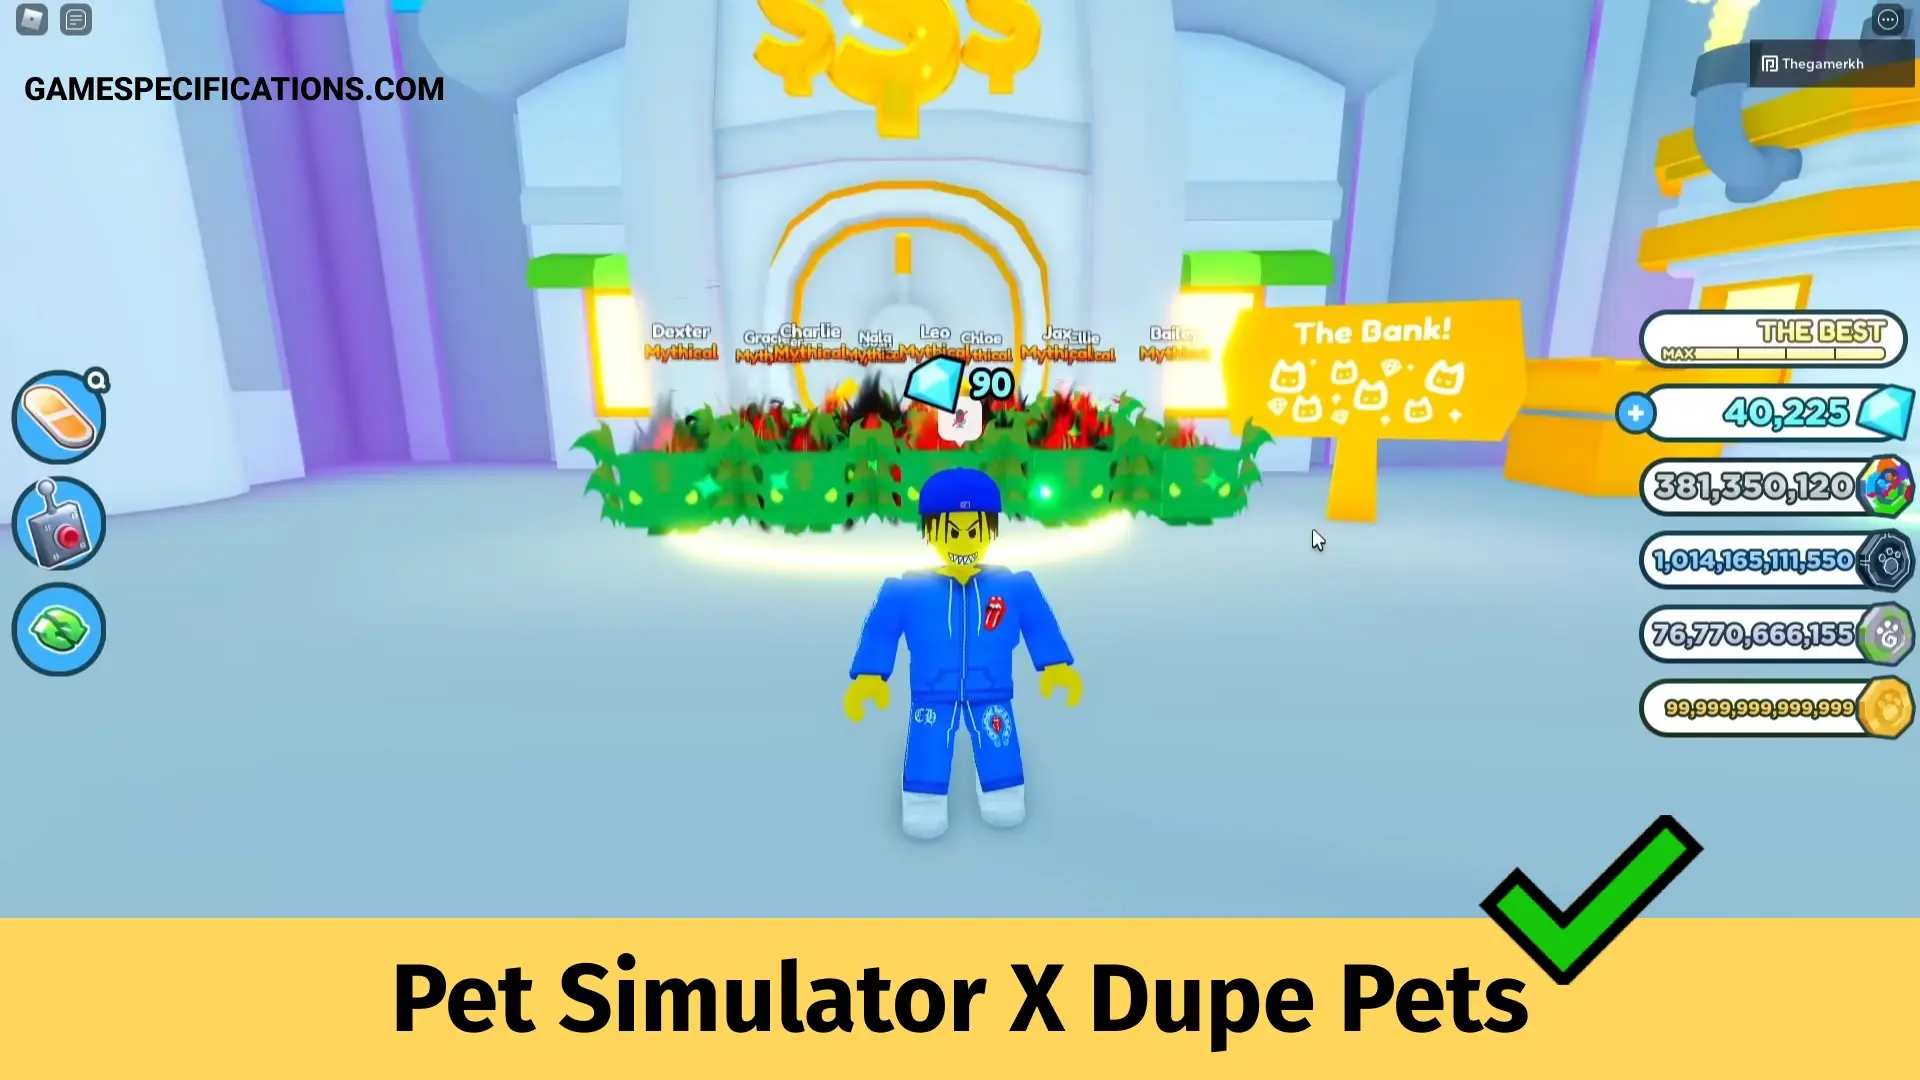 How To Dupe Pets In Pet Simulator X